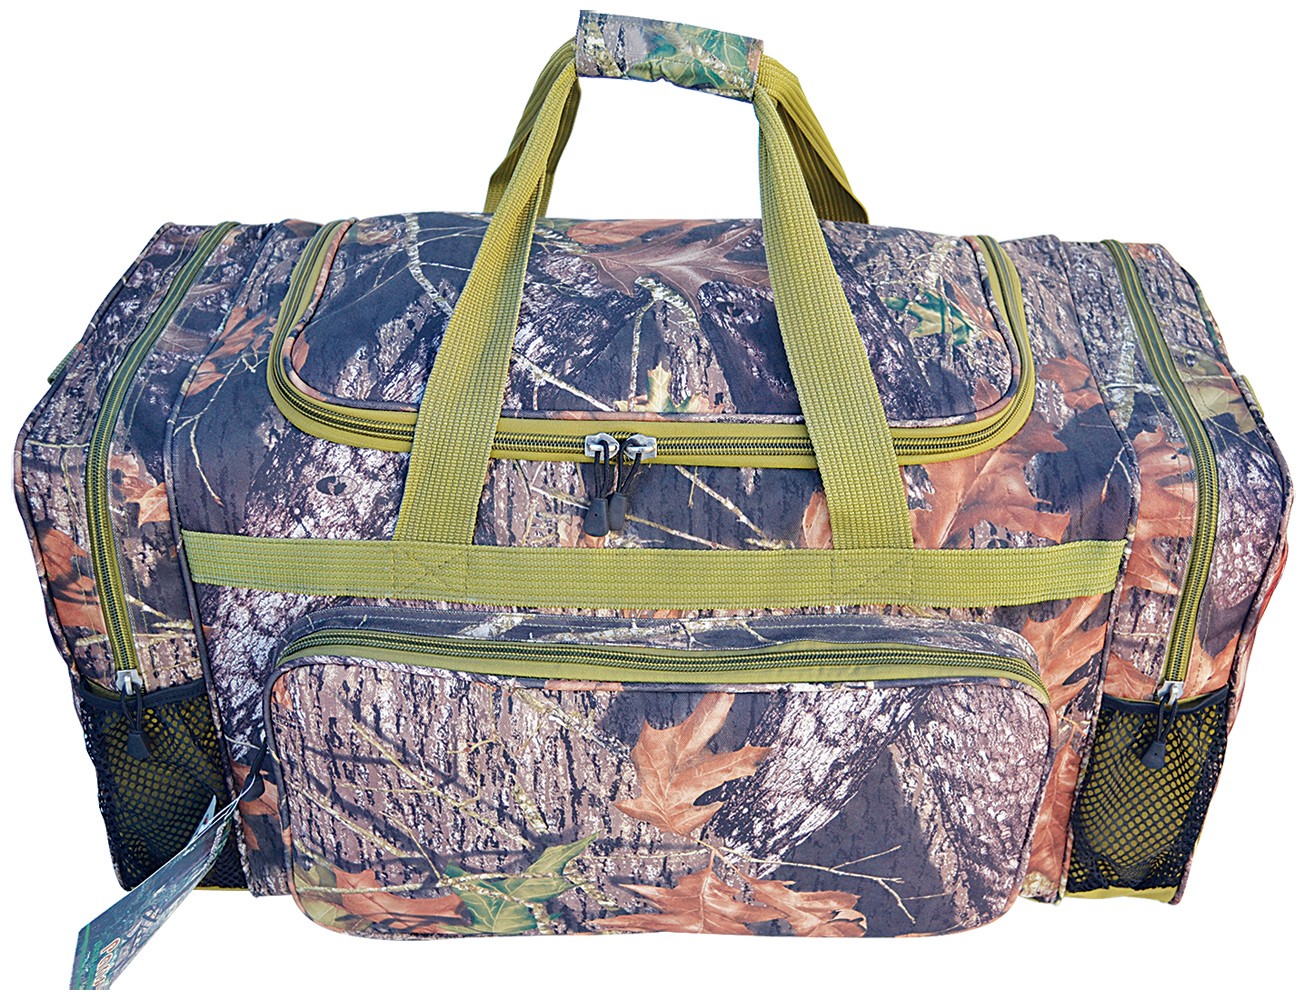 Winchester Large Utility Field Duffle Bag Realtree Hunting Camping Travel 7C4 